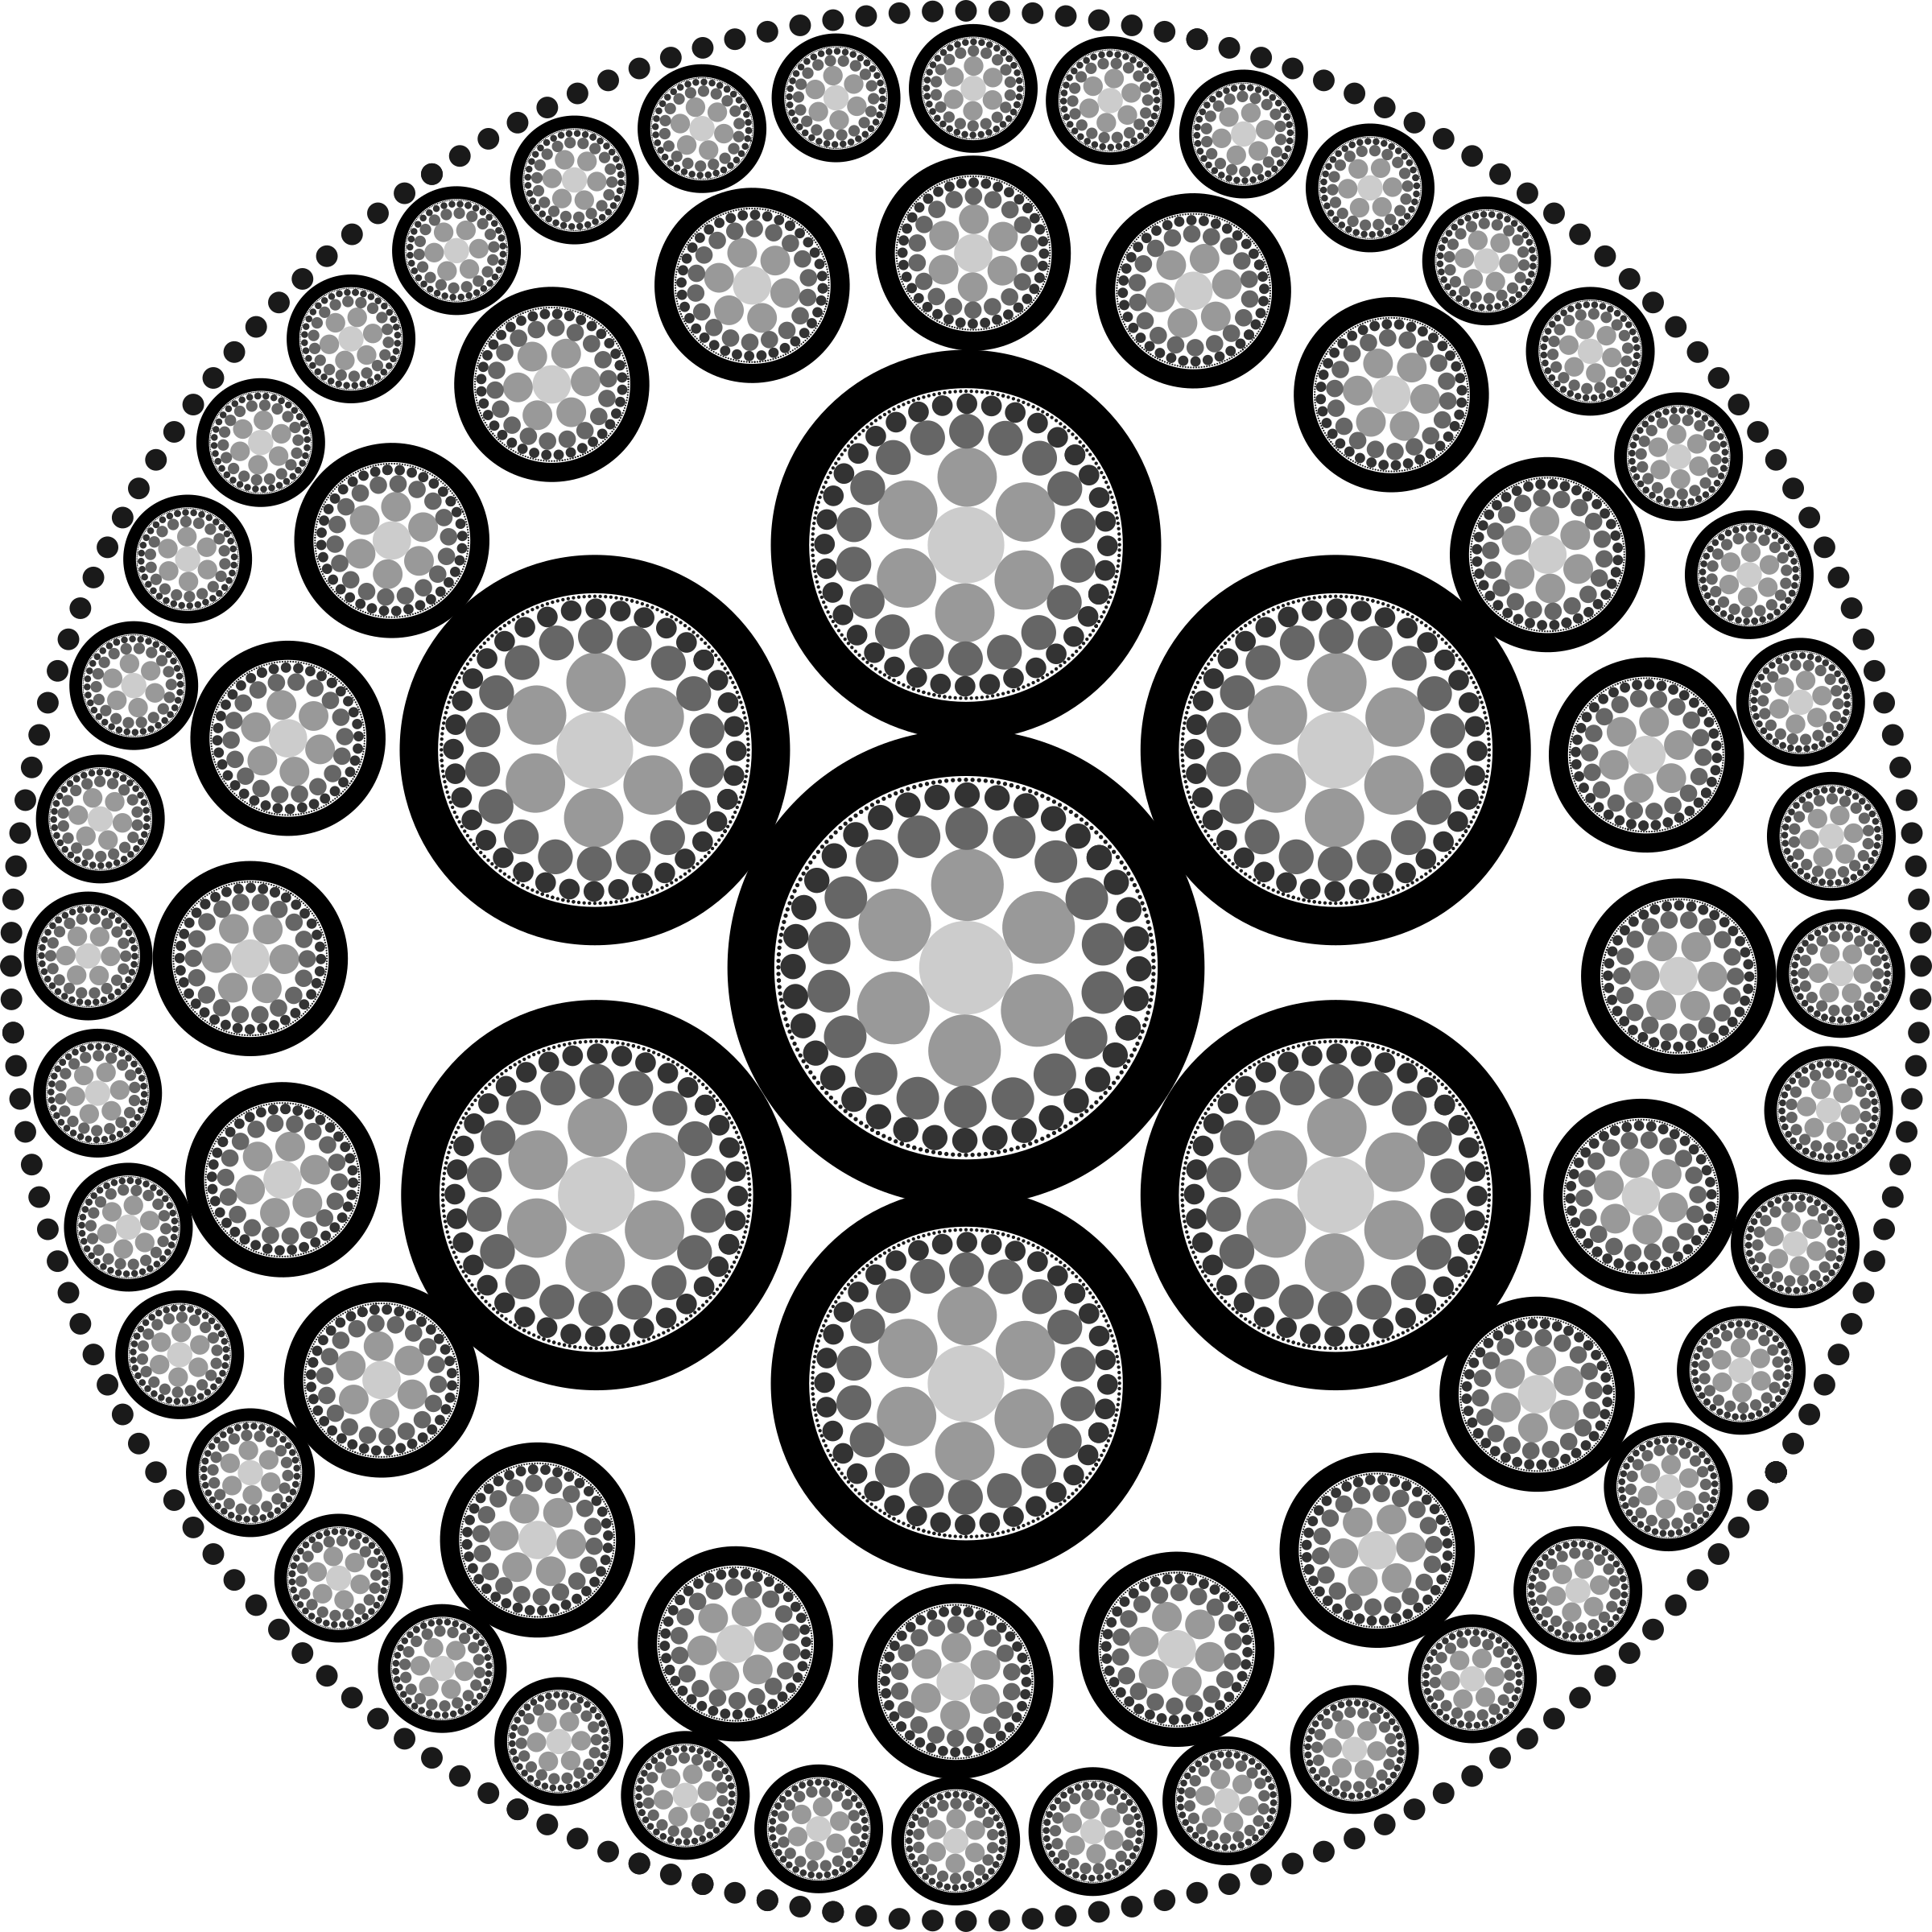 A Circular Pattern Of White And Gray Dots